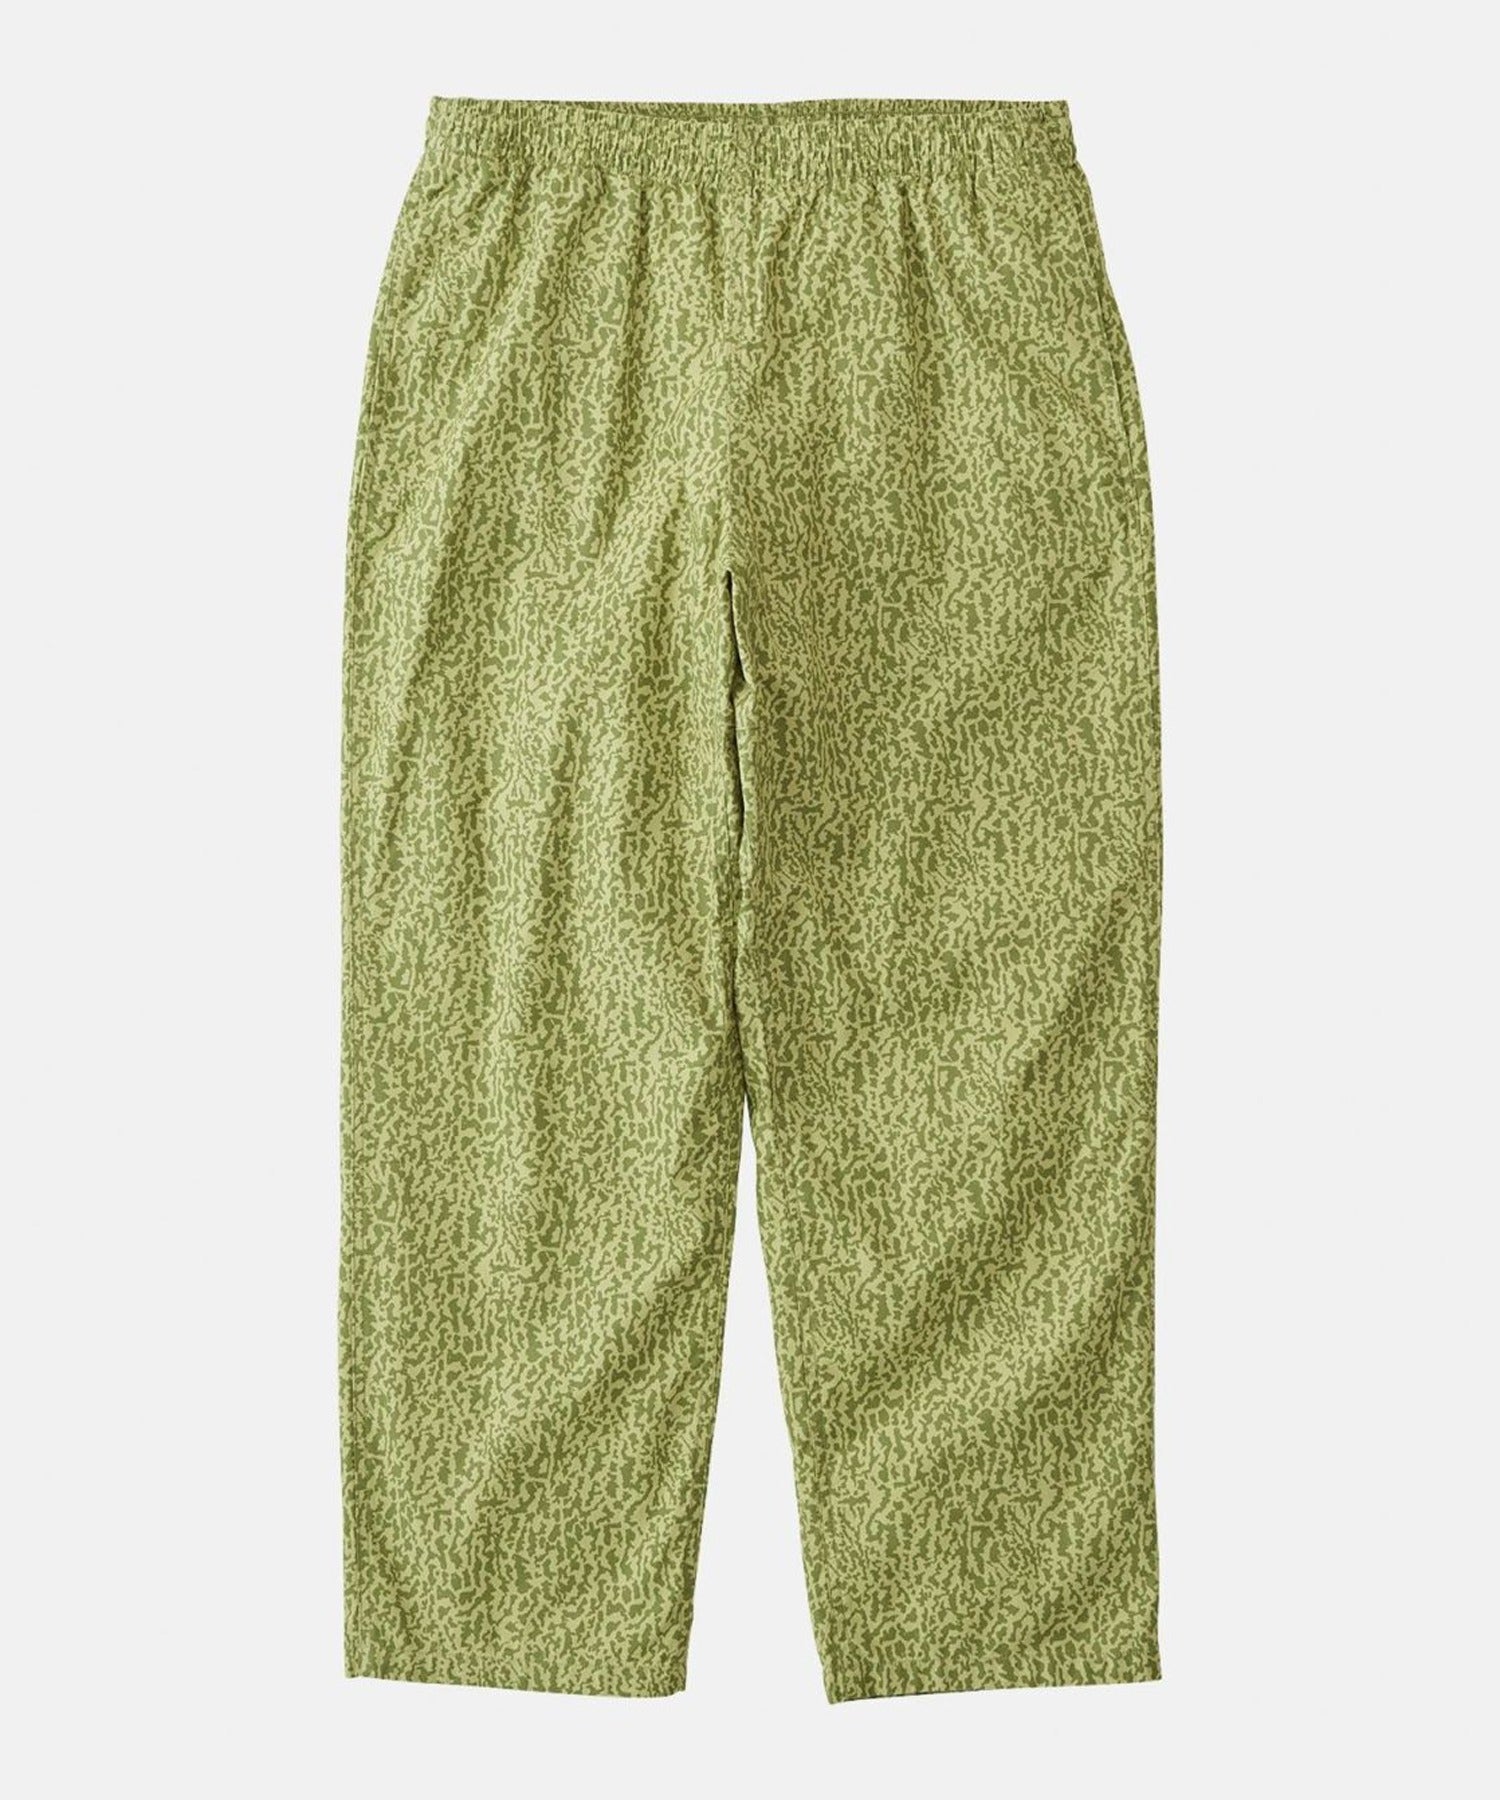 SWELL PANT